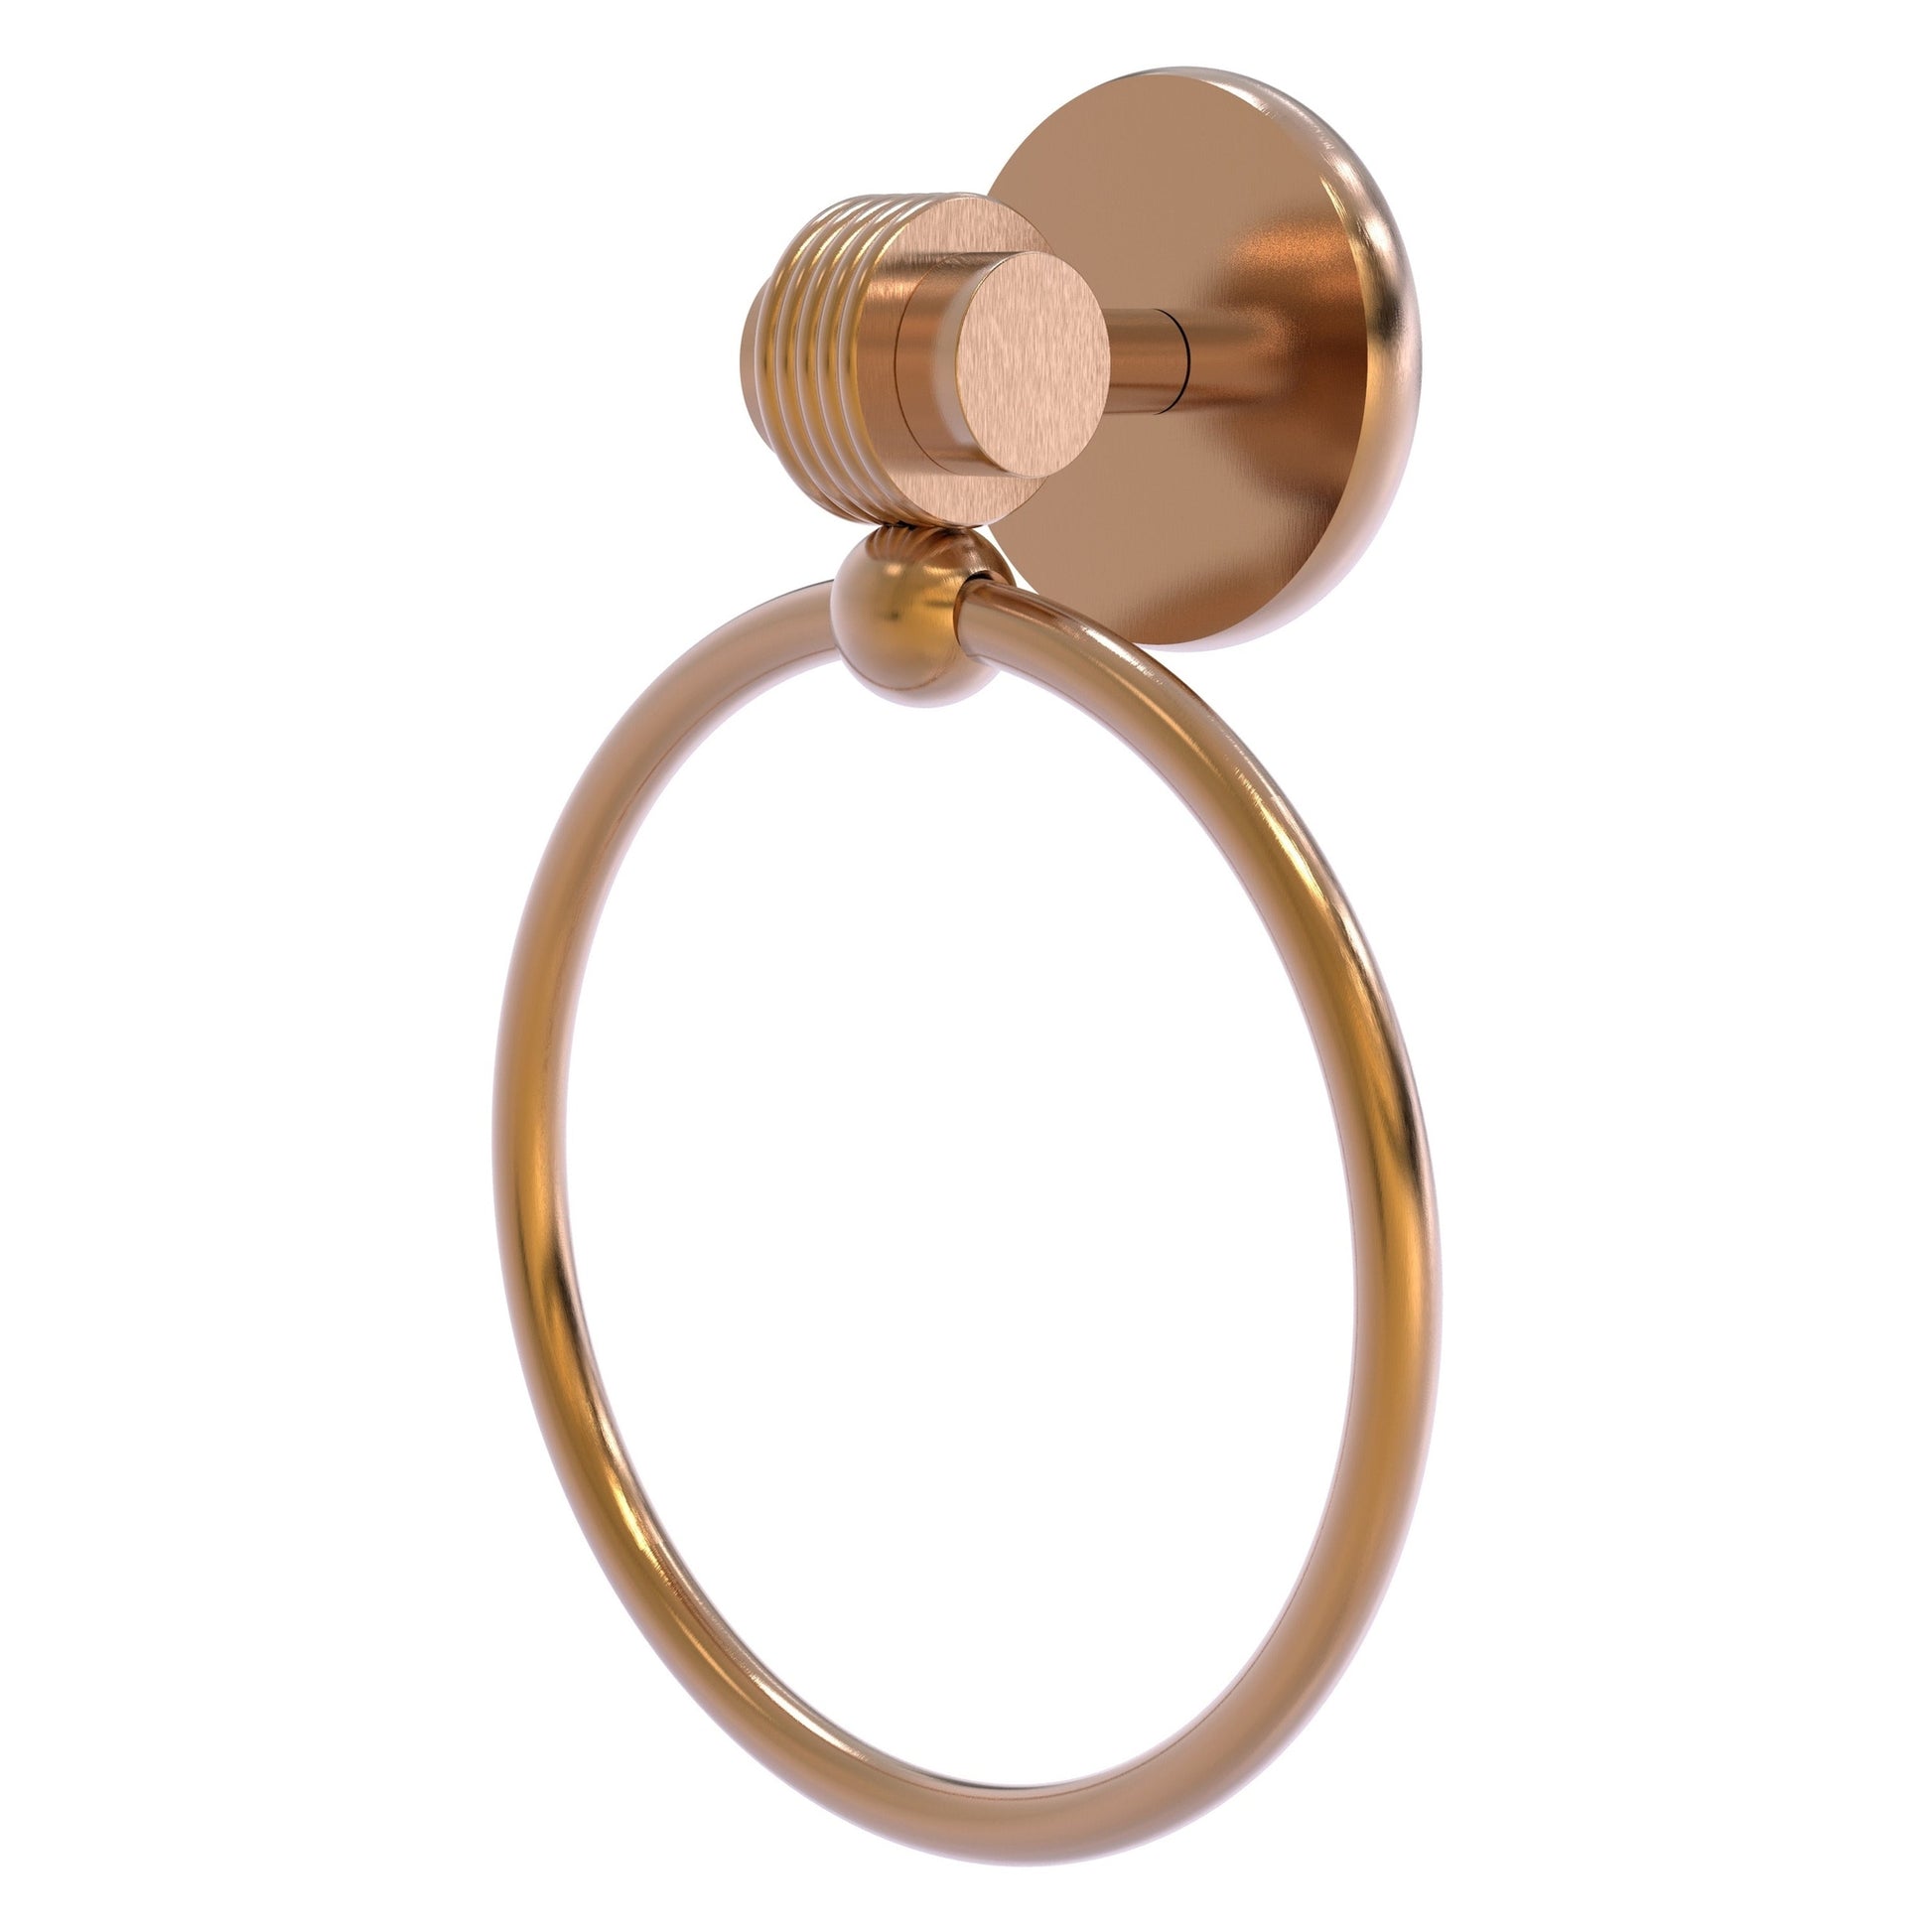 Allied Brass Satellite Orbit Two 6" x 3.5" Brushed Bronze Solid Brass Towel Ring With Grooved Accent